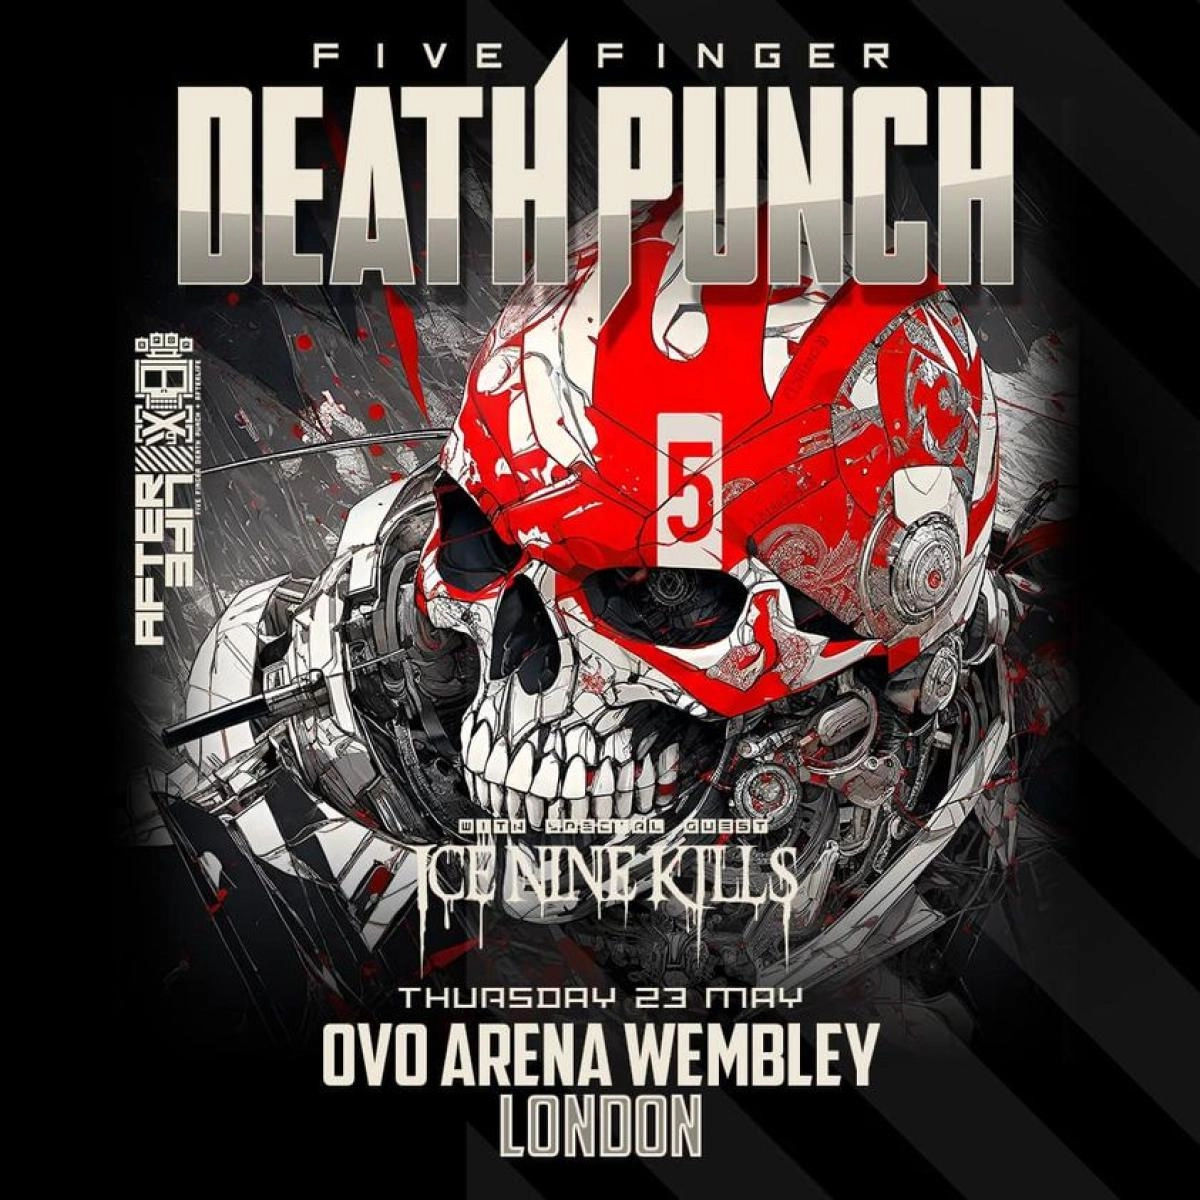 Five Finger Death Punch at OVO Arena Wembley Tickets